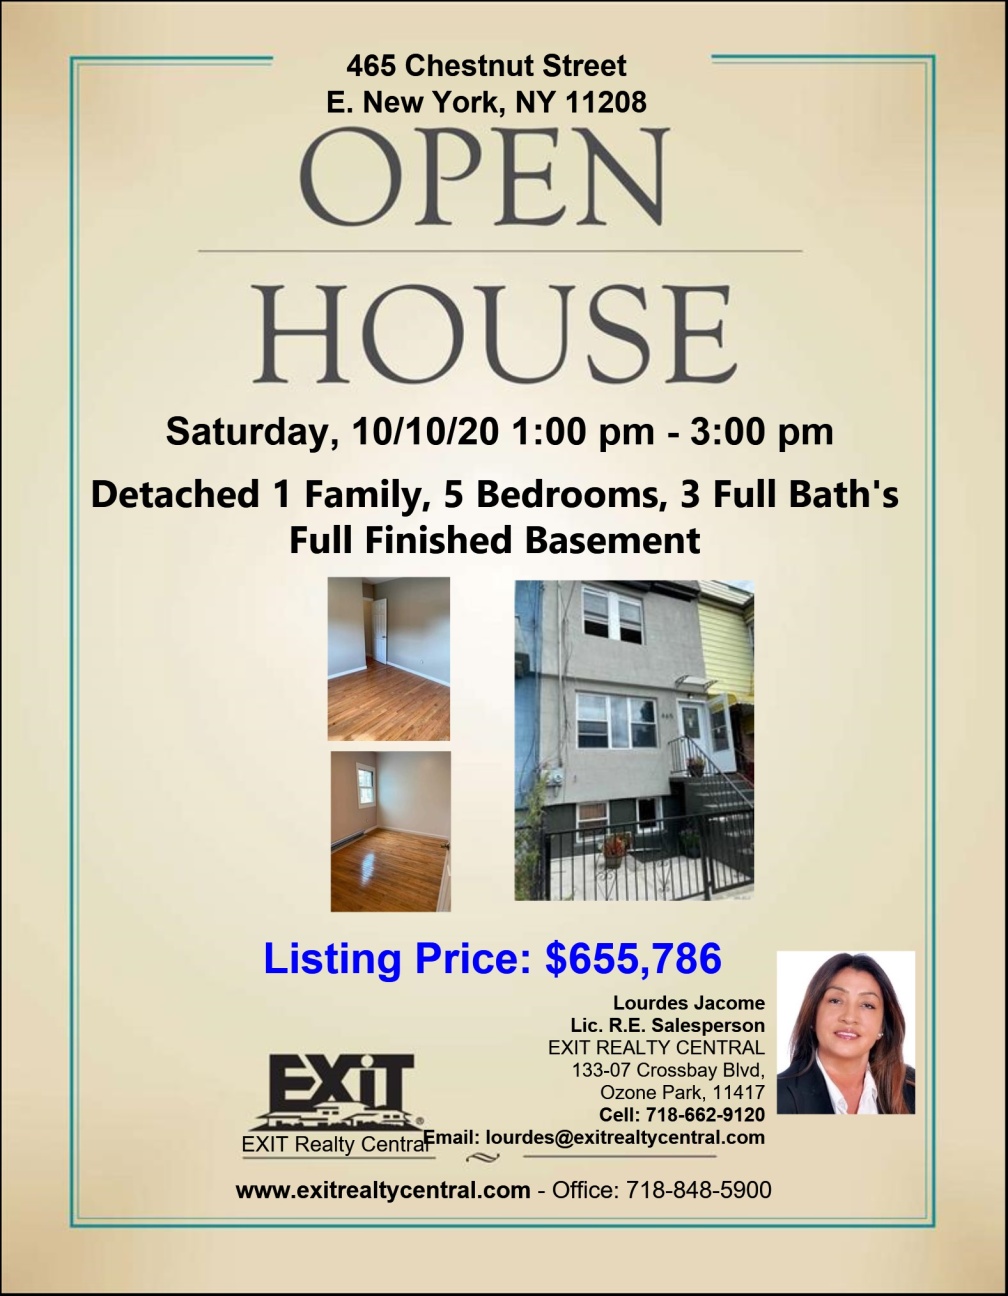 Open House in E. New York 10/10 1-3pm